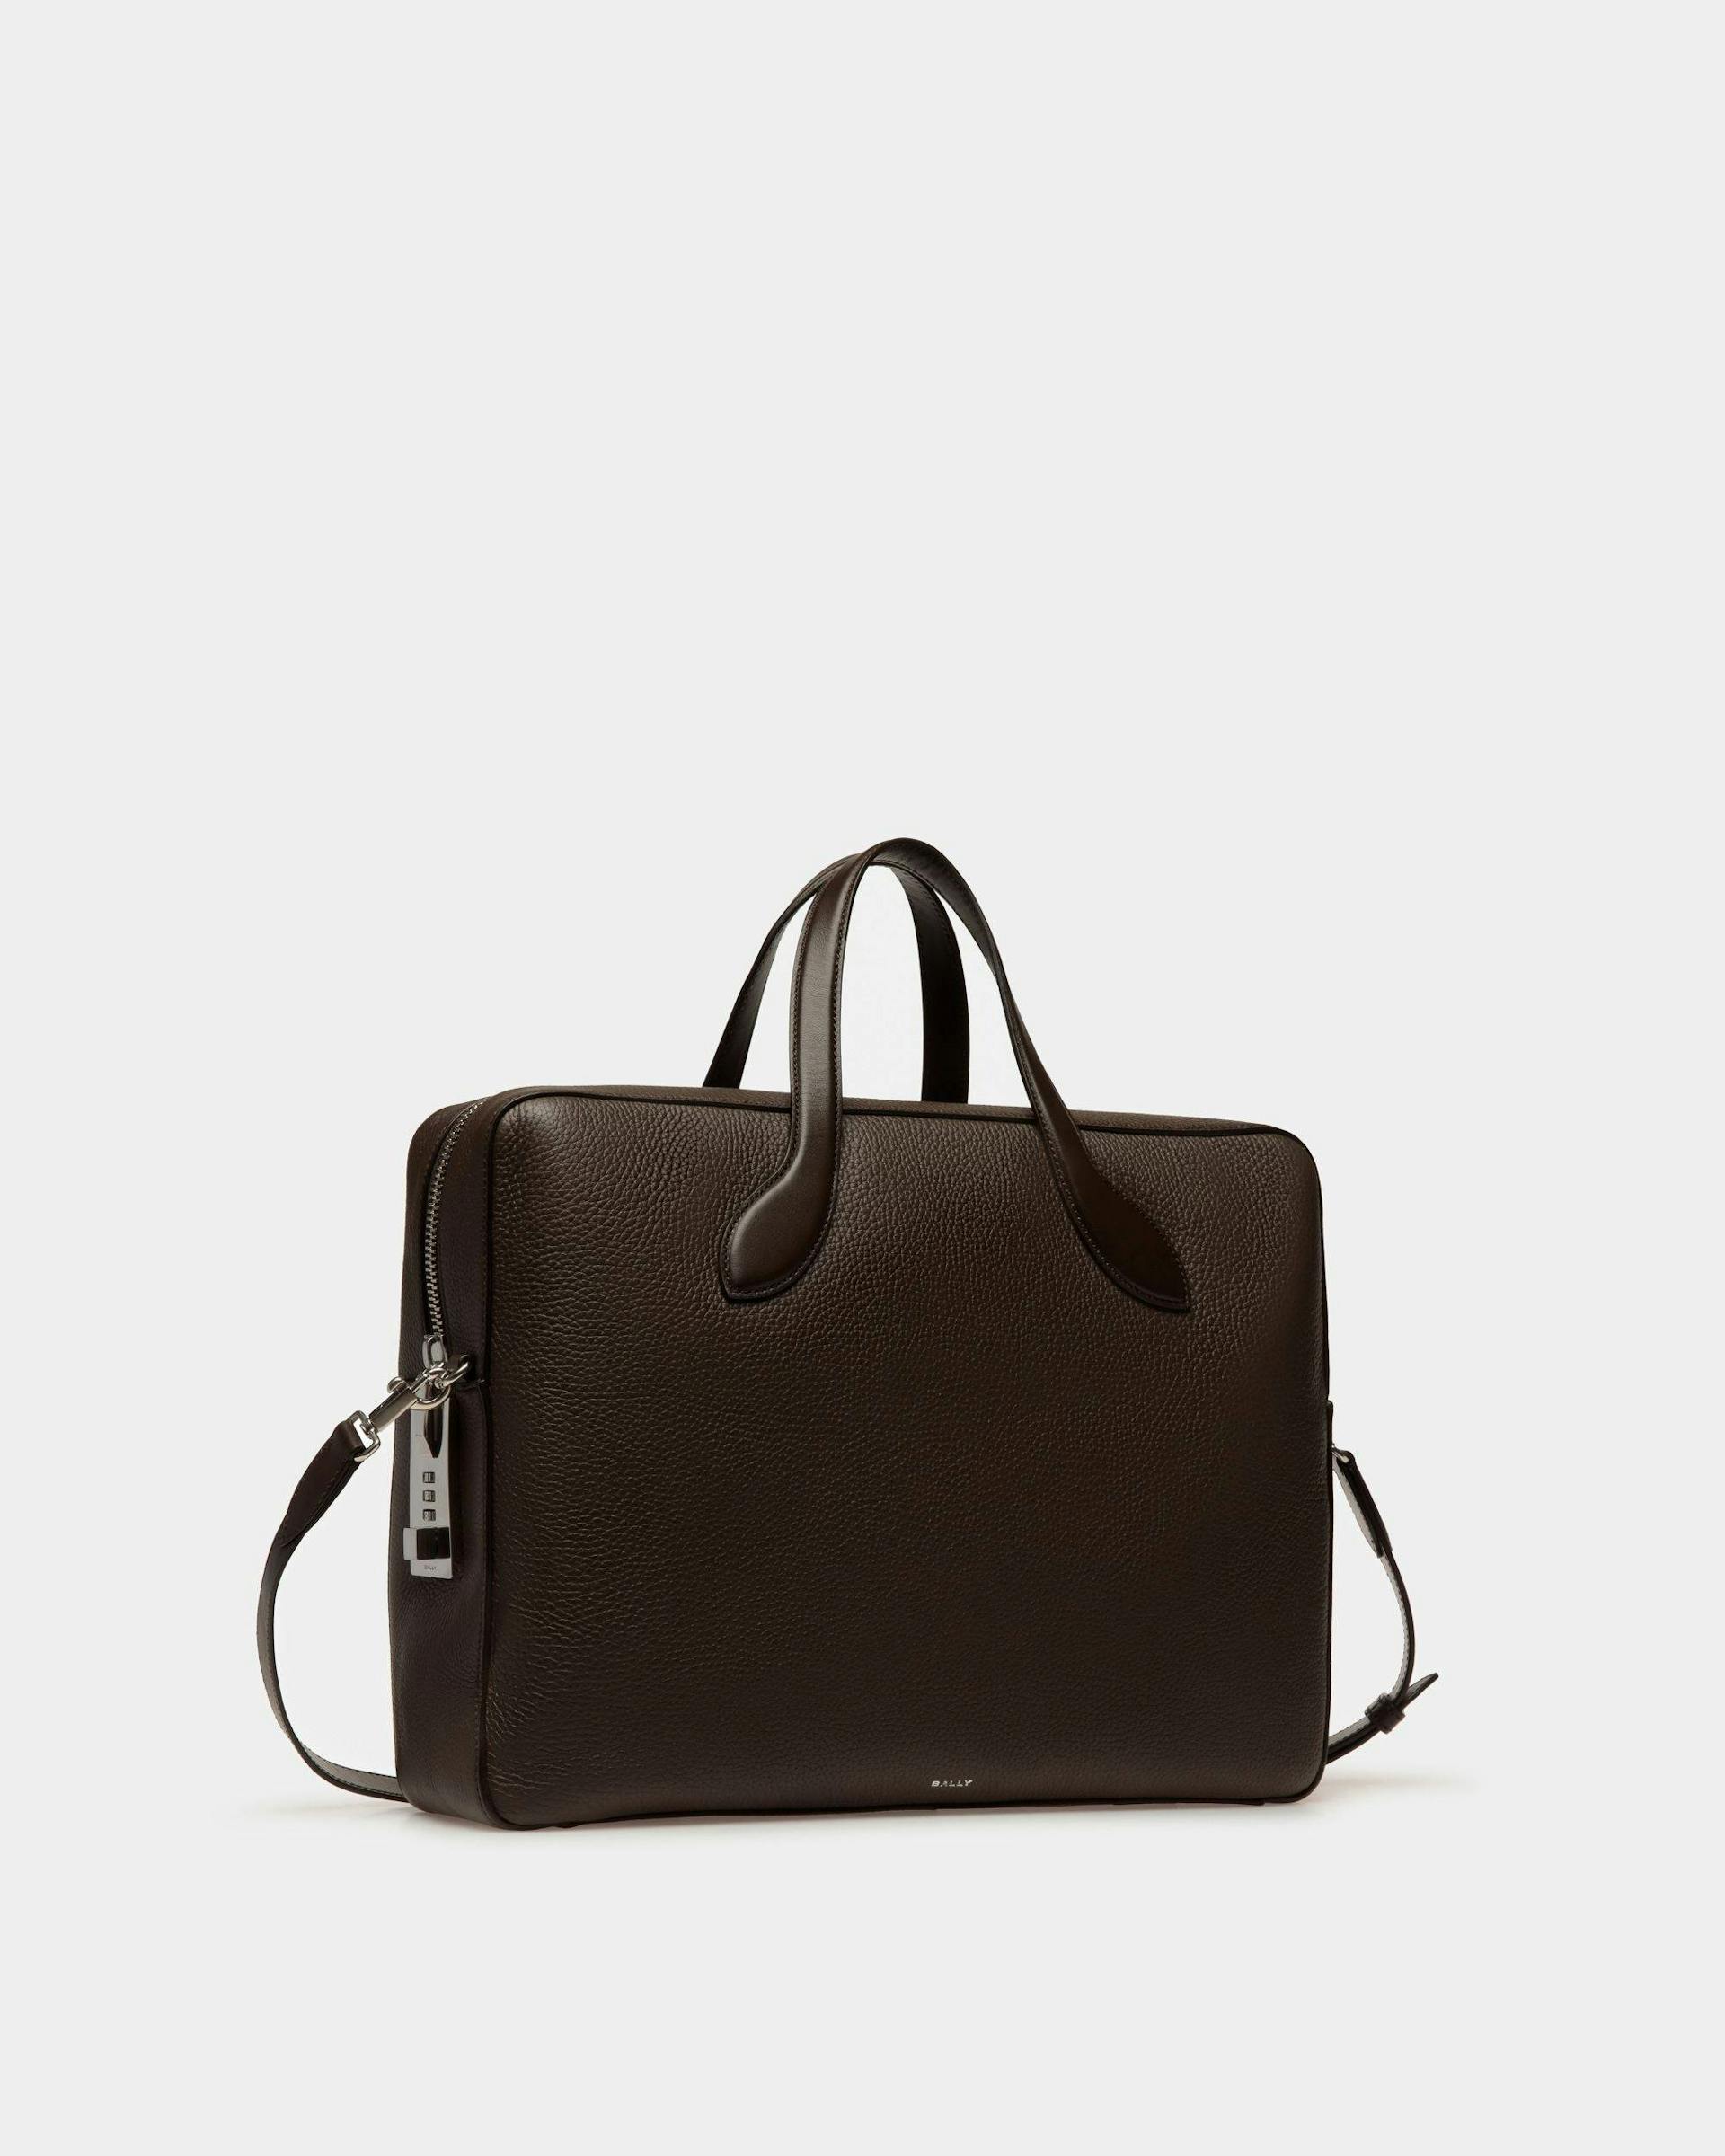 Lago Briefcase In Brown Leather - Men's - Bally - 03